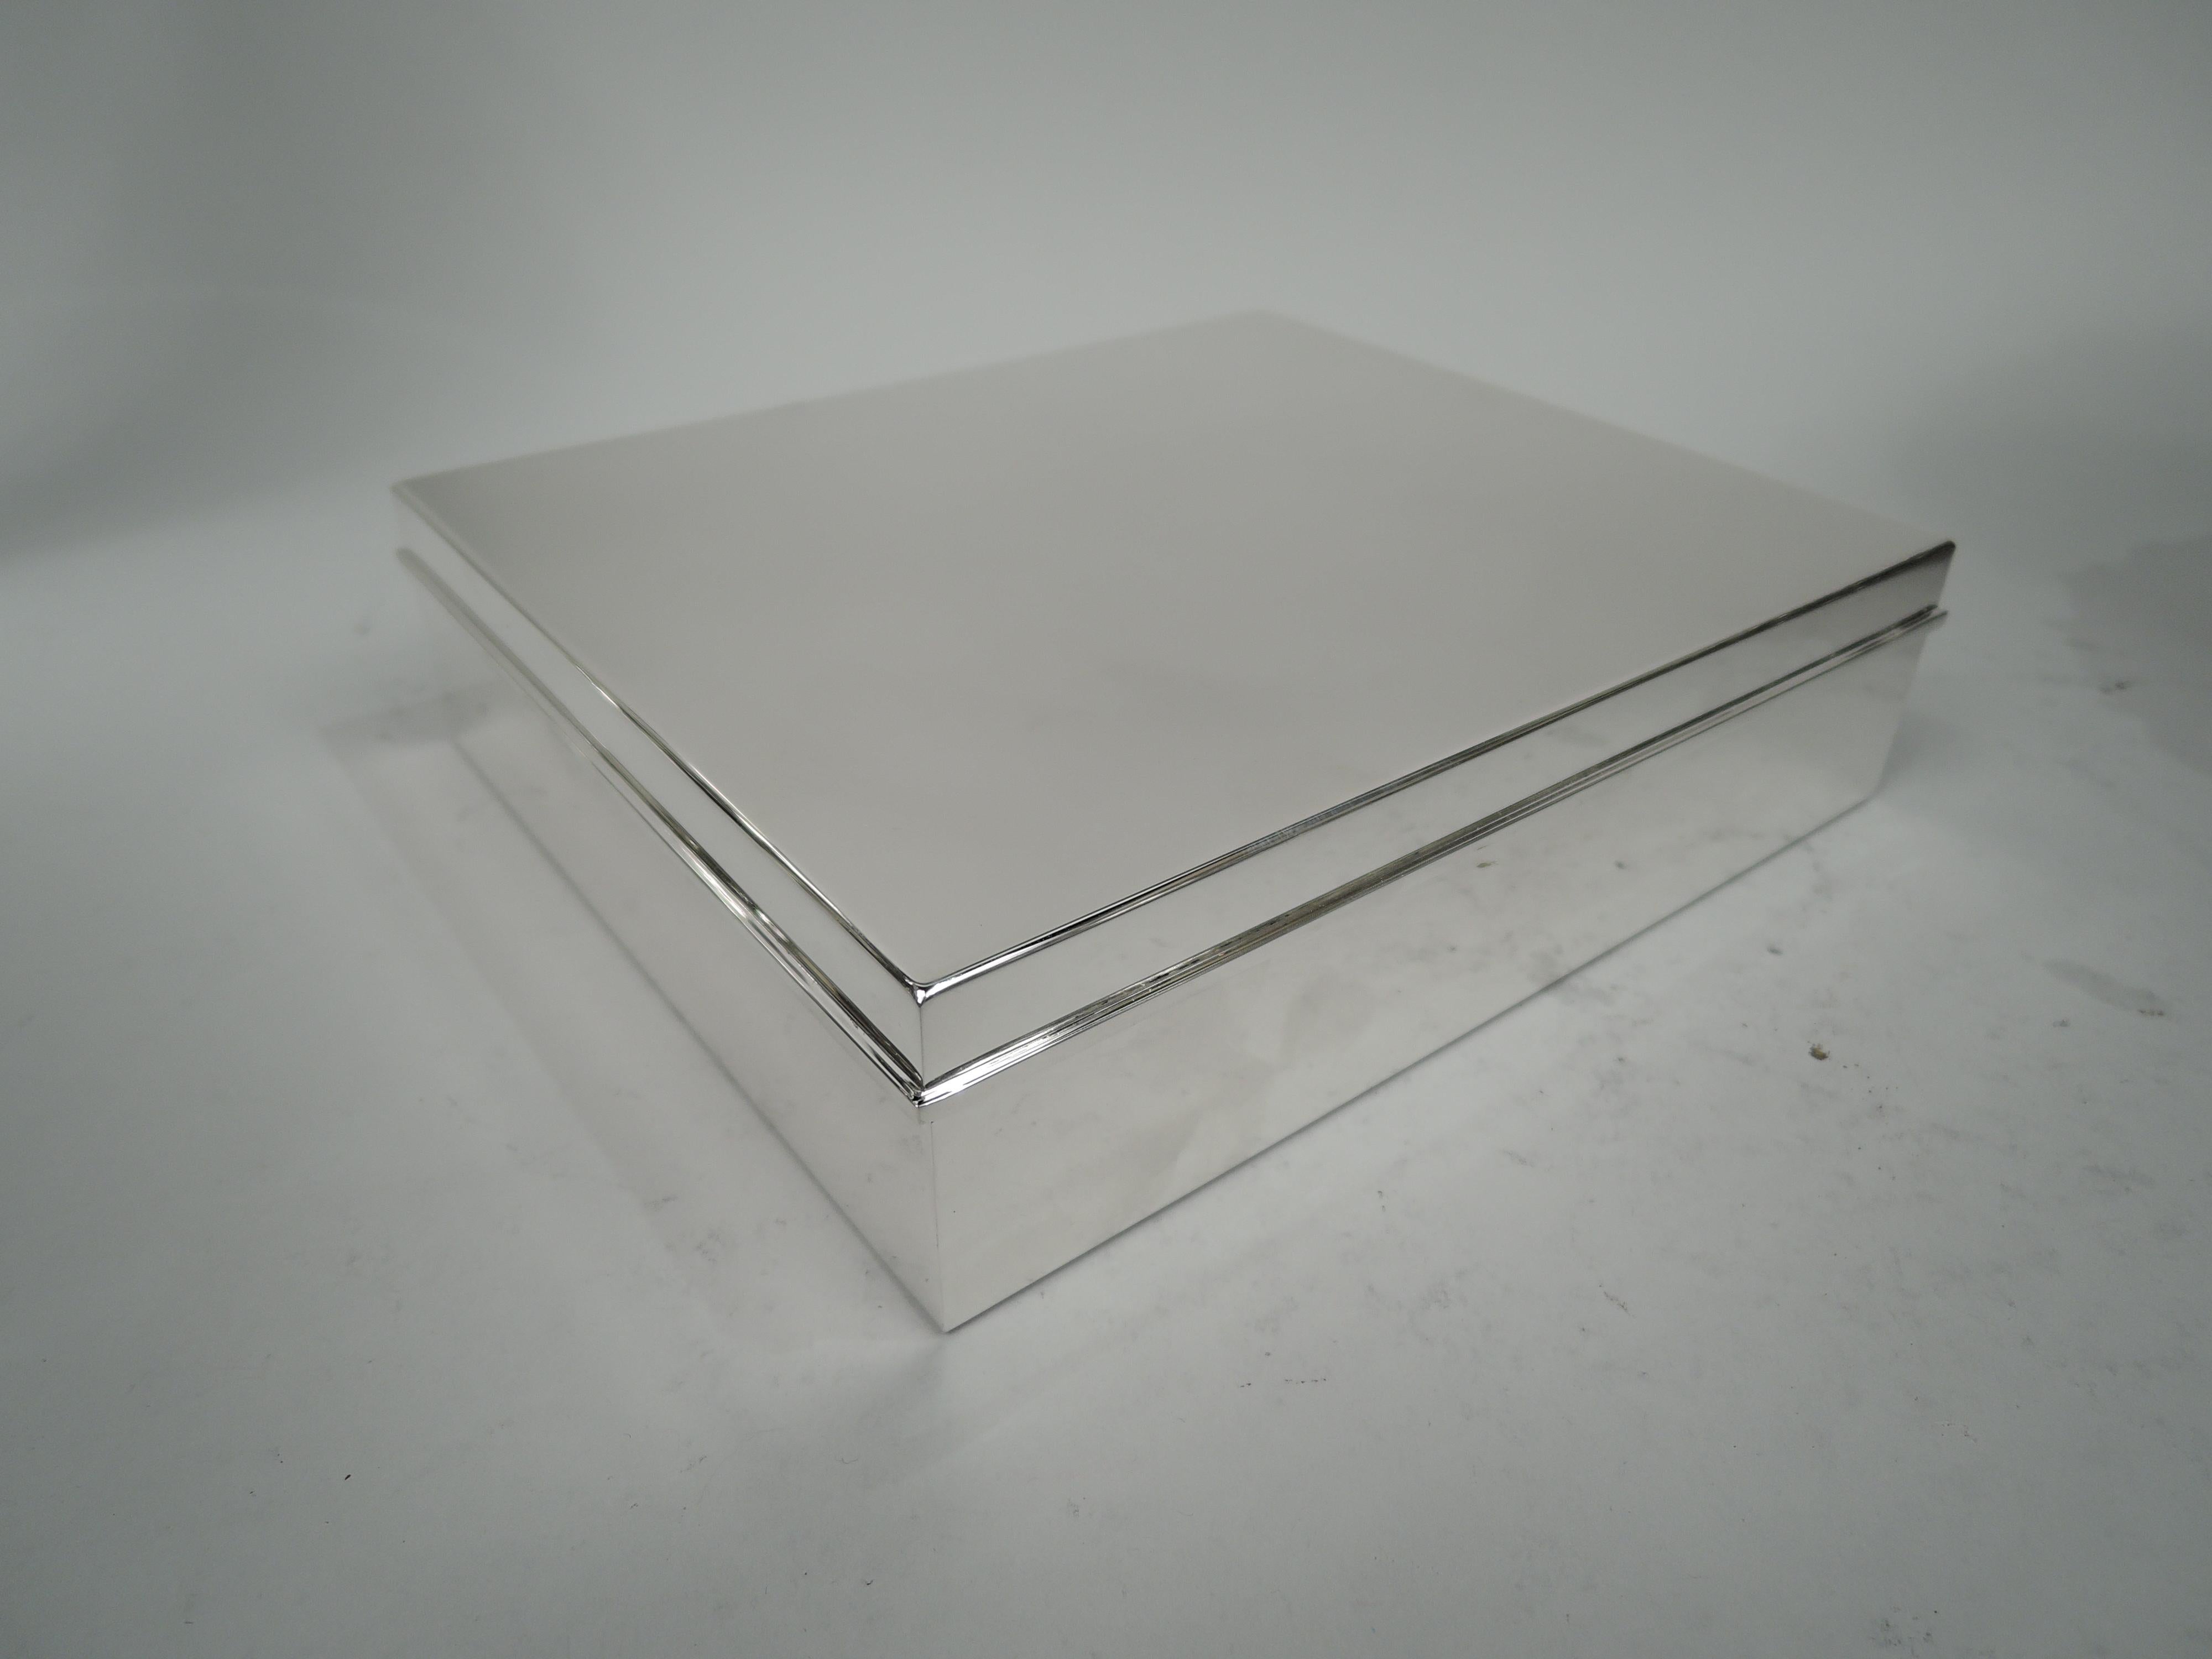 Mid-Century Modern sterling silver box. Made by Tiffany & Co. in New York. Rectangular with straight sides. Cover flat and hinged with flat molded rim. Box interior cedar lined and partitioned. Box interior gilt washed. Fully marked including